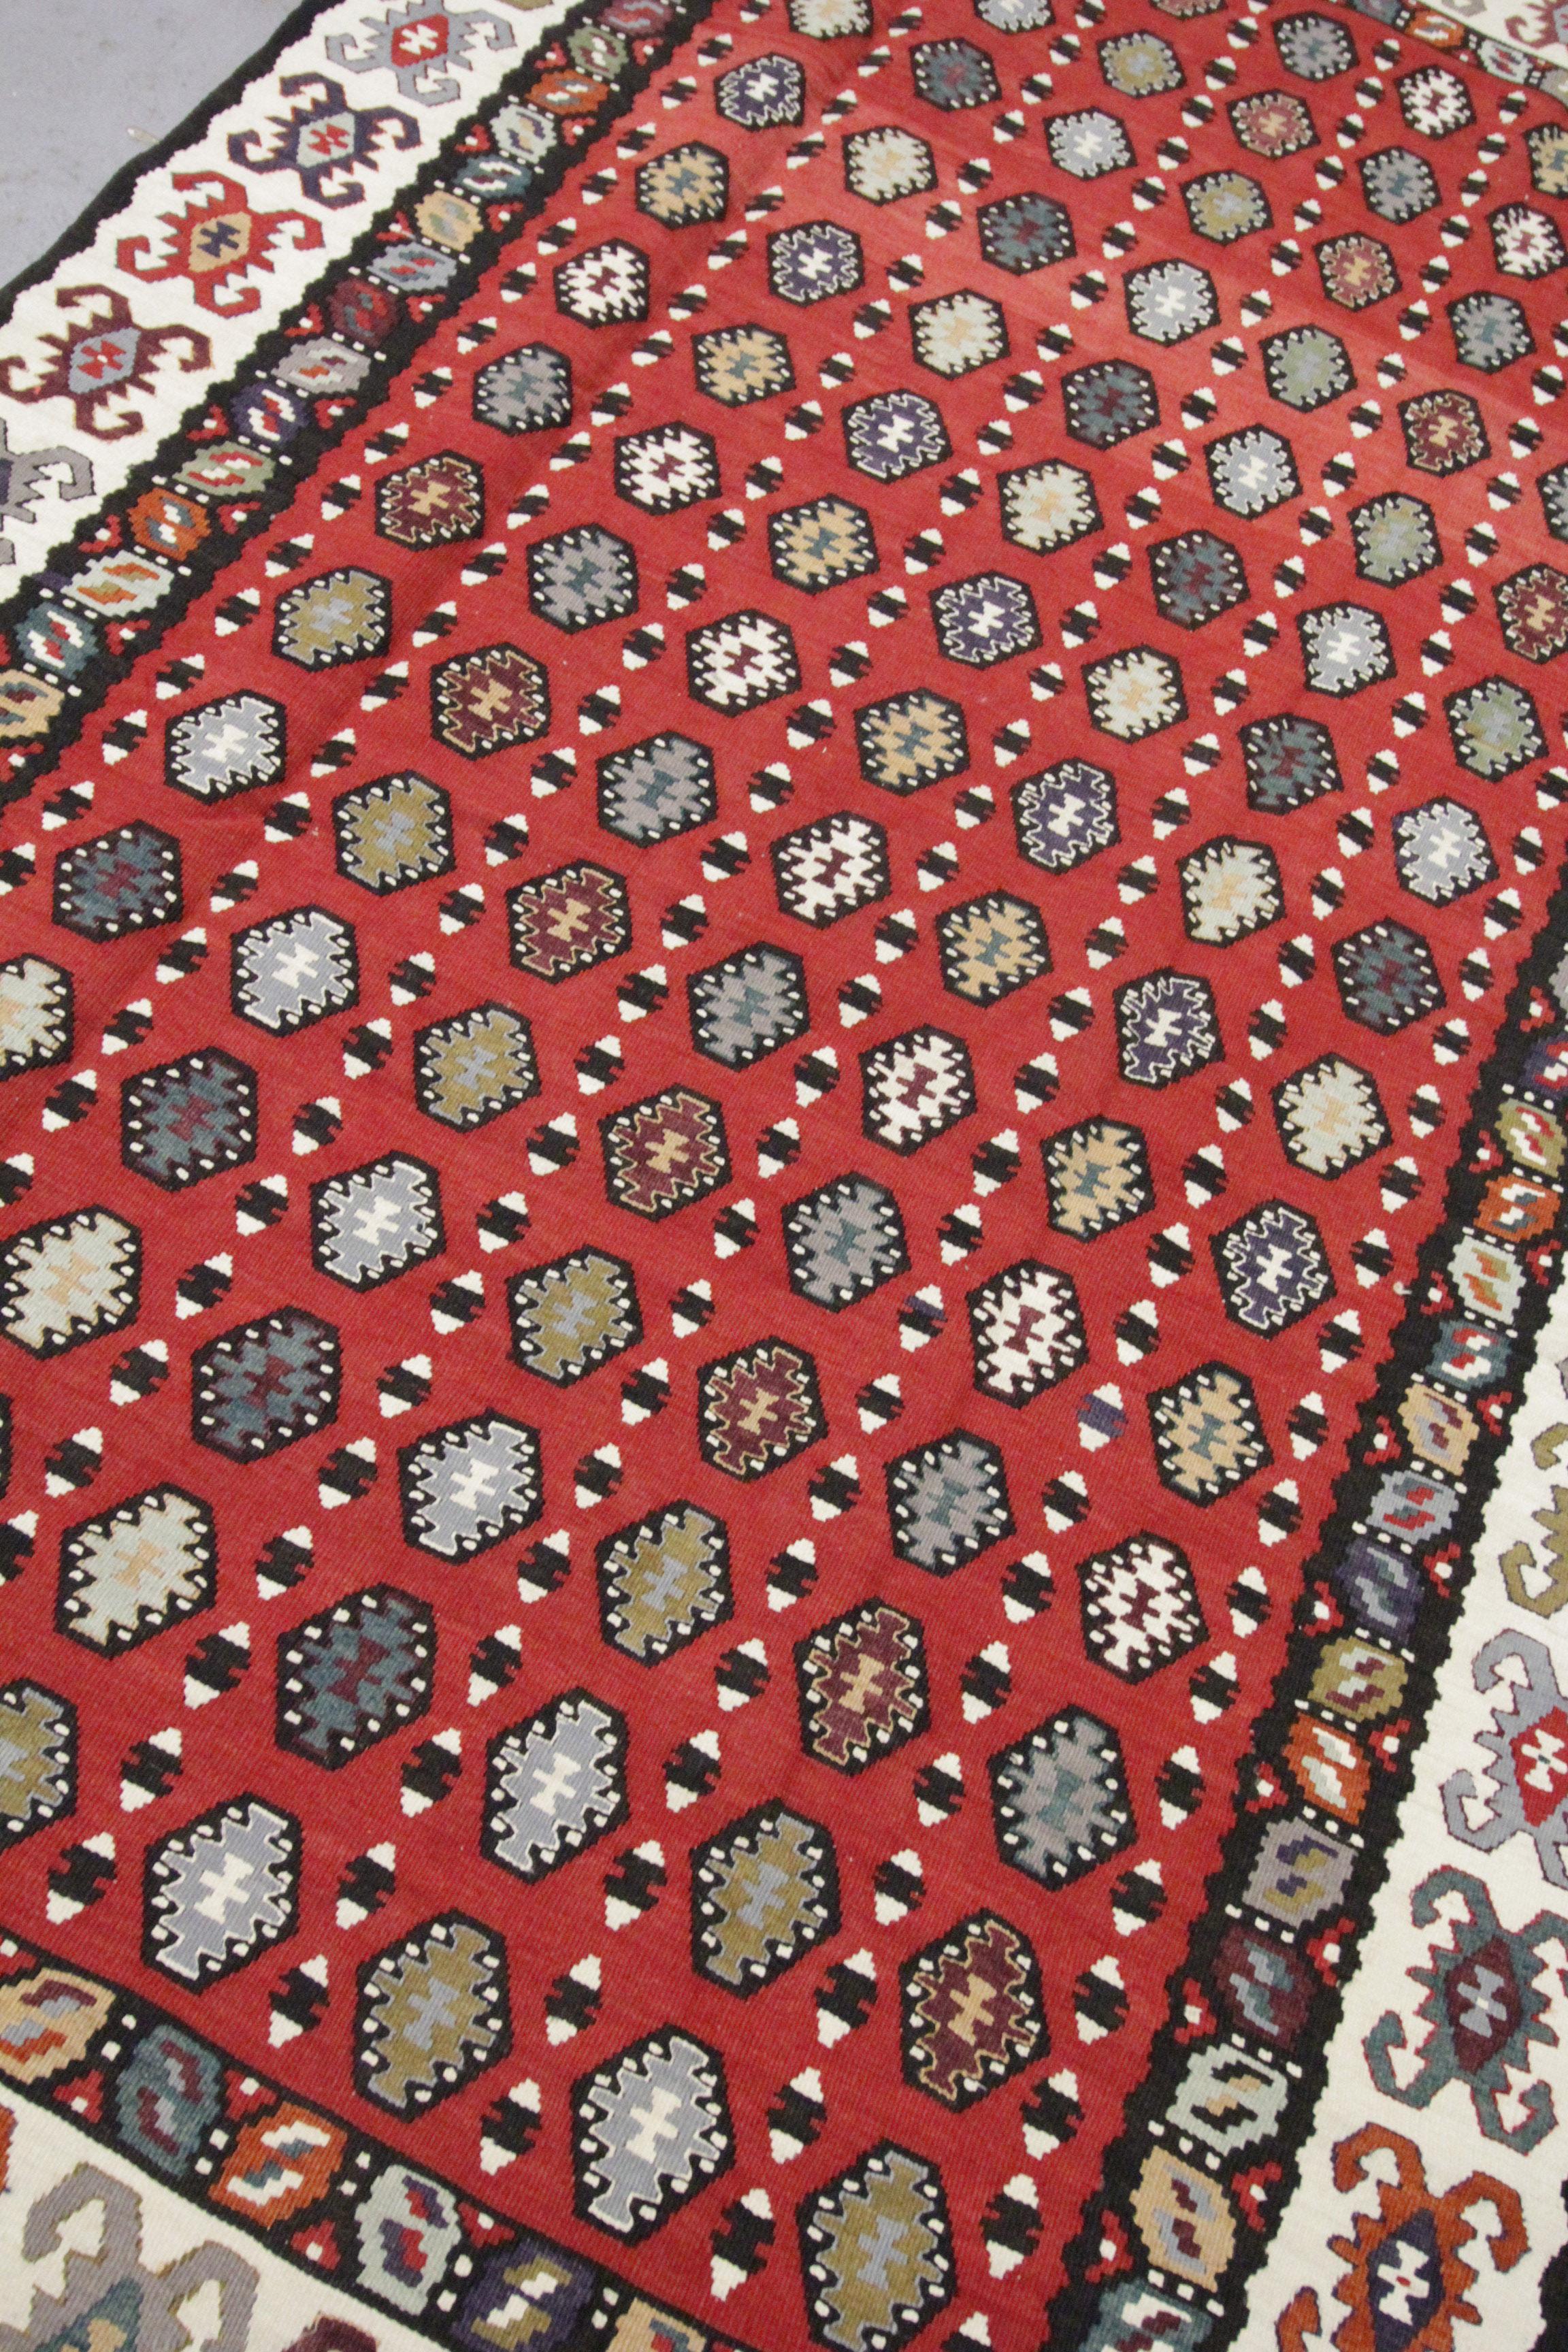 This beautifully woven bold rug is a handwoven kilim that was incorporated in the early 20th century. The design is bold with a rich red background and repeating motifs woven in blue, grey and mustard accents. A repeating pattern border then